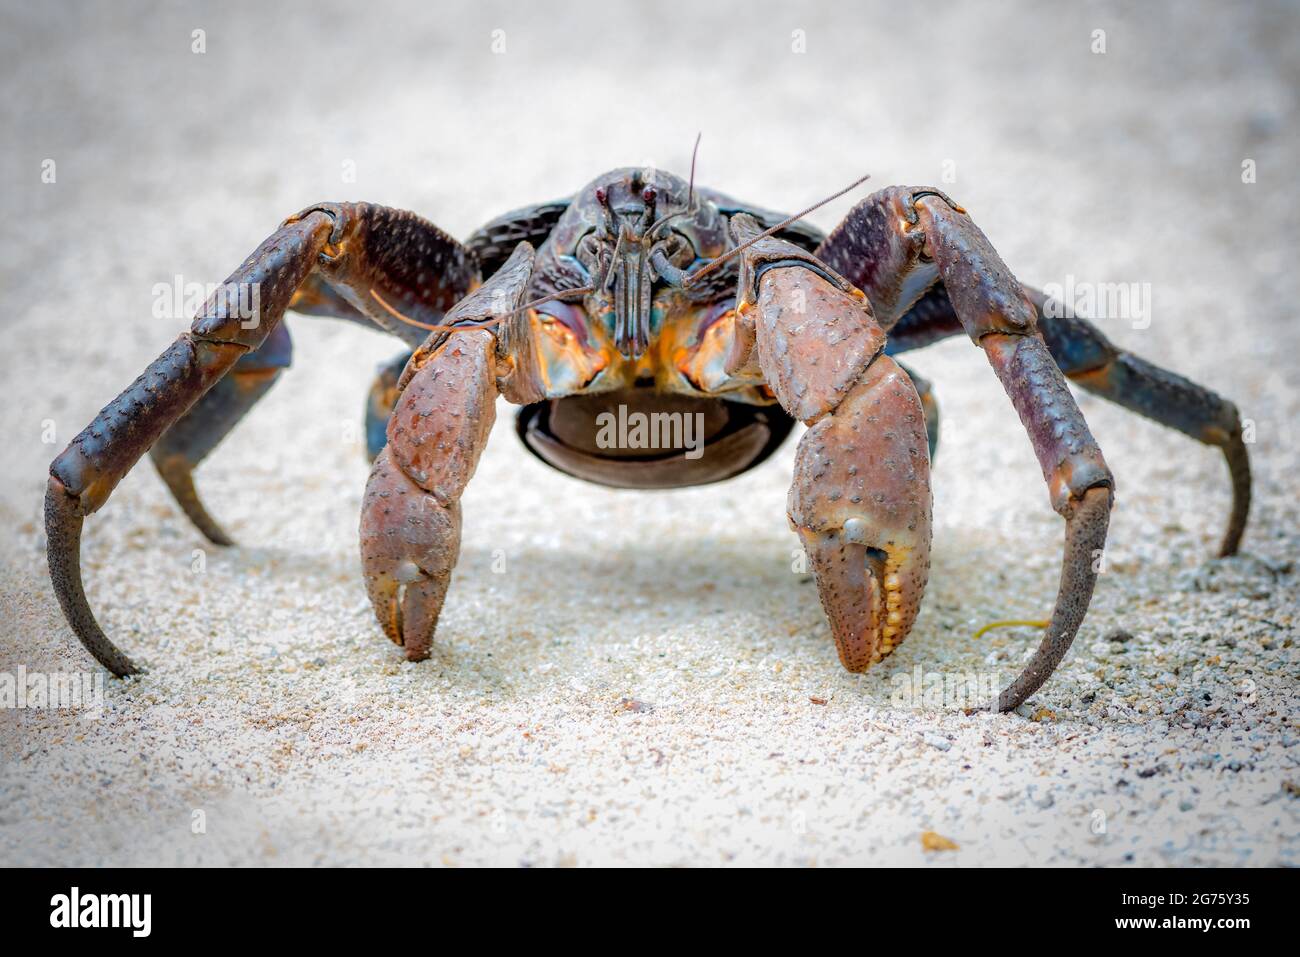 https://c8.alamy.com/comp/2G75Y35/coconut-crabs-are-the-worlds-largest-terrestrial-anthropods-they-get-their-names-from-being-able-to-open-a-coconut-with-their-massive-pincers-somet-2G75Y35.jpg